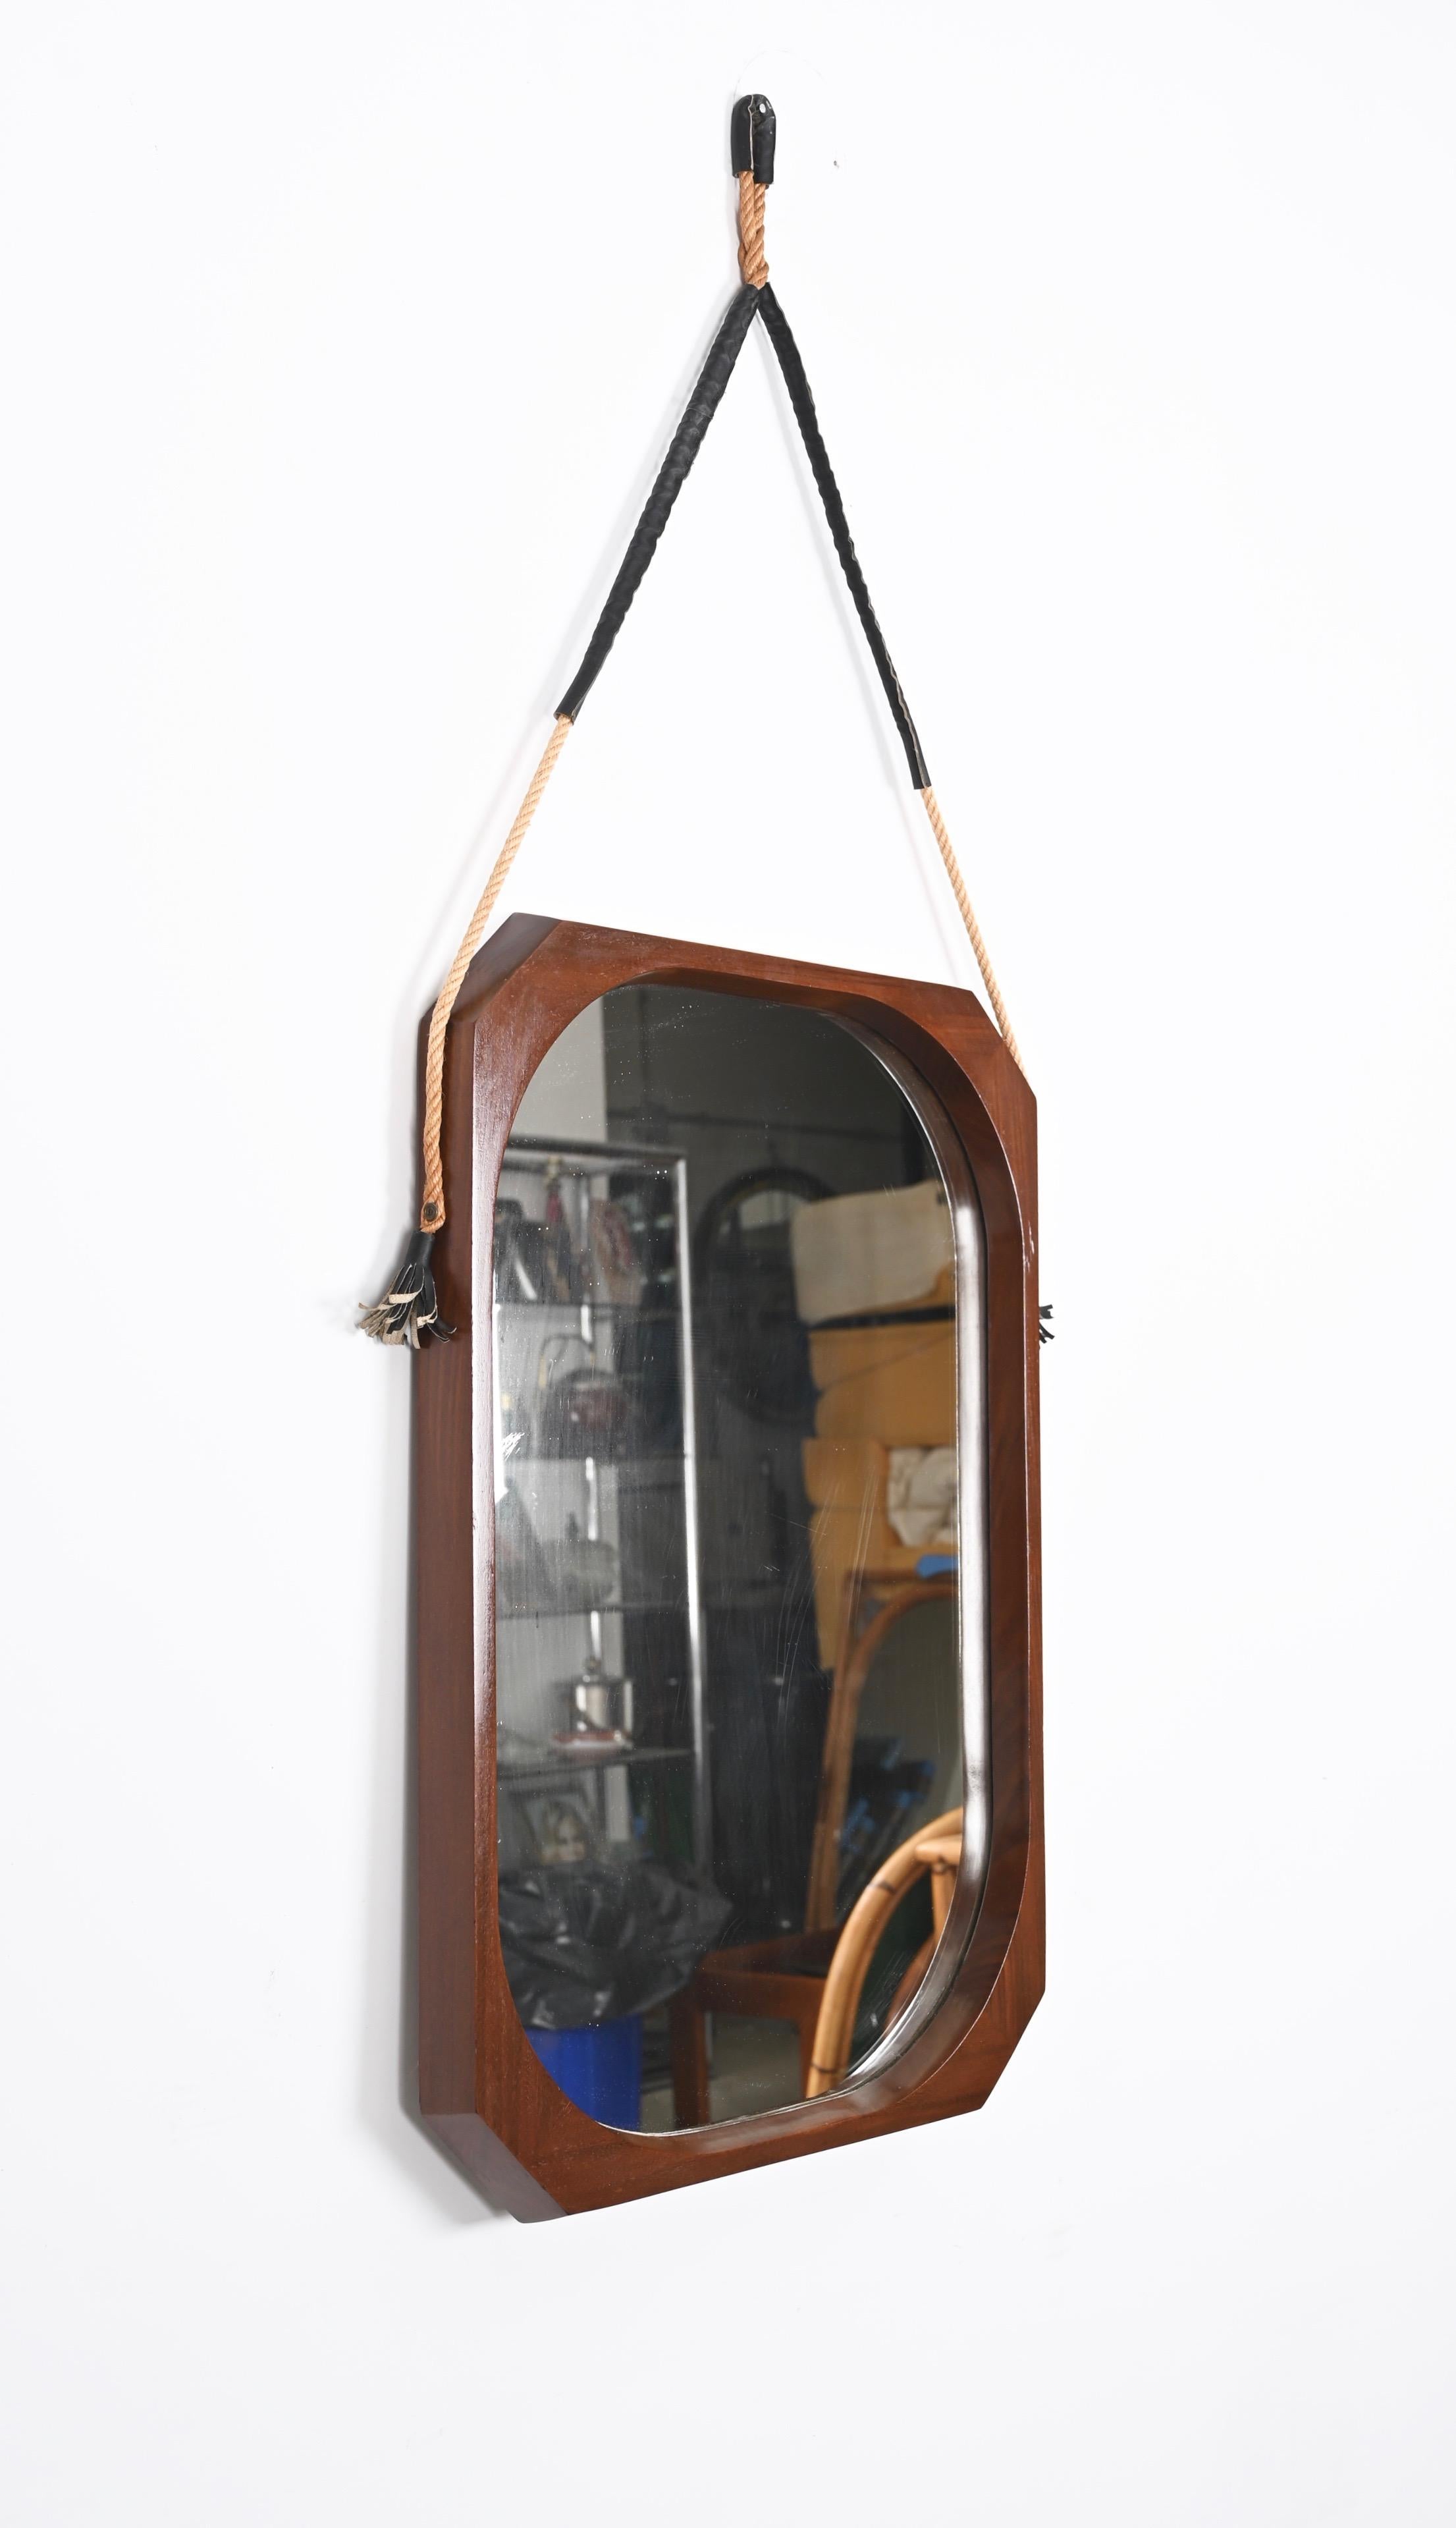 Midcentury Rope and Leather Teak Framed Italian Wall Mirror, 1960s For Sale 1